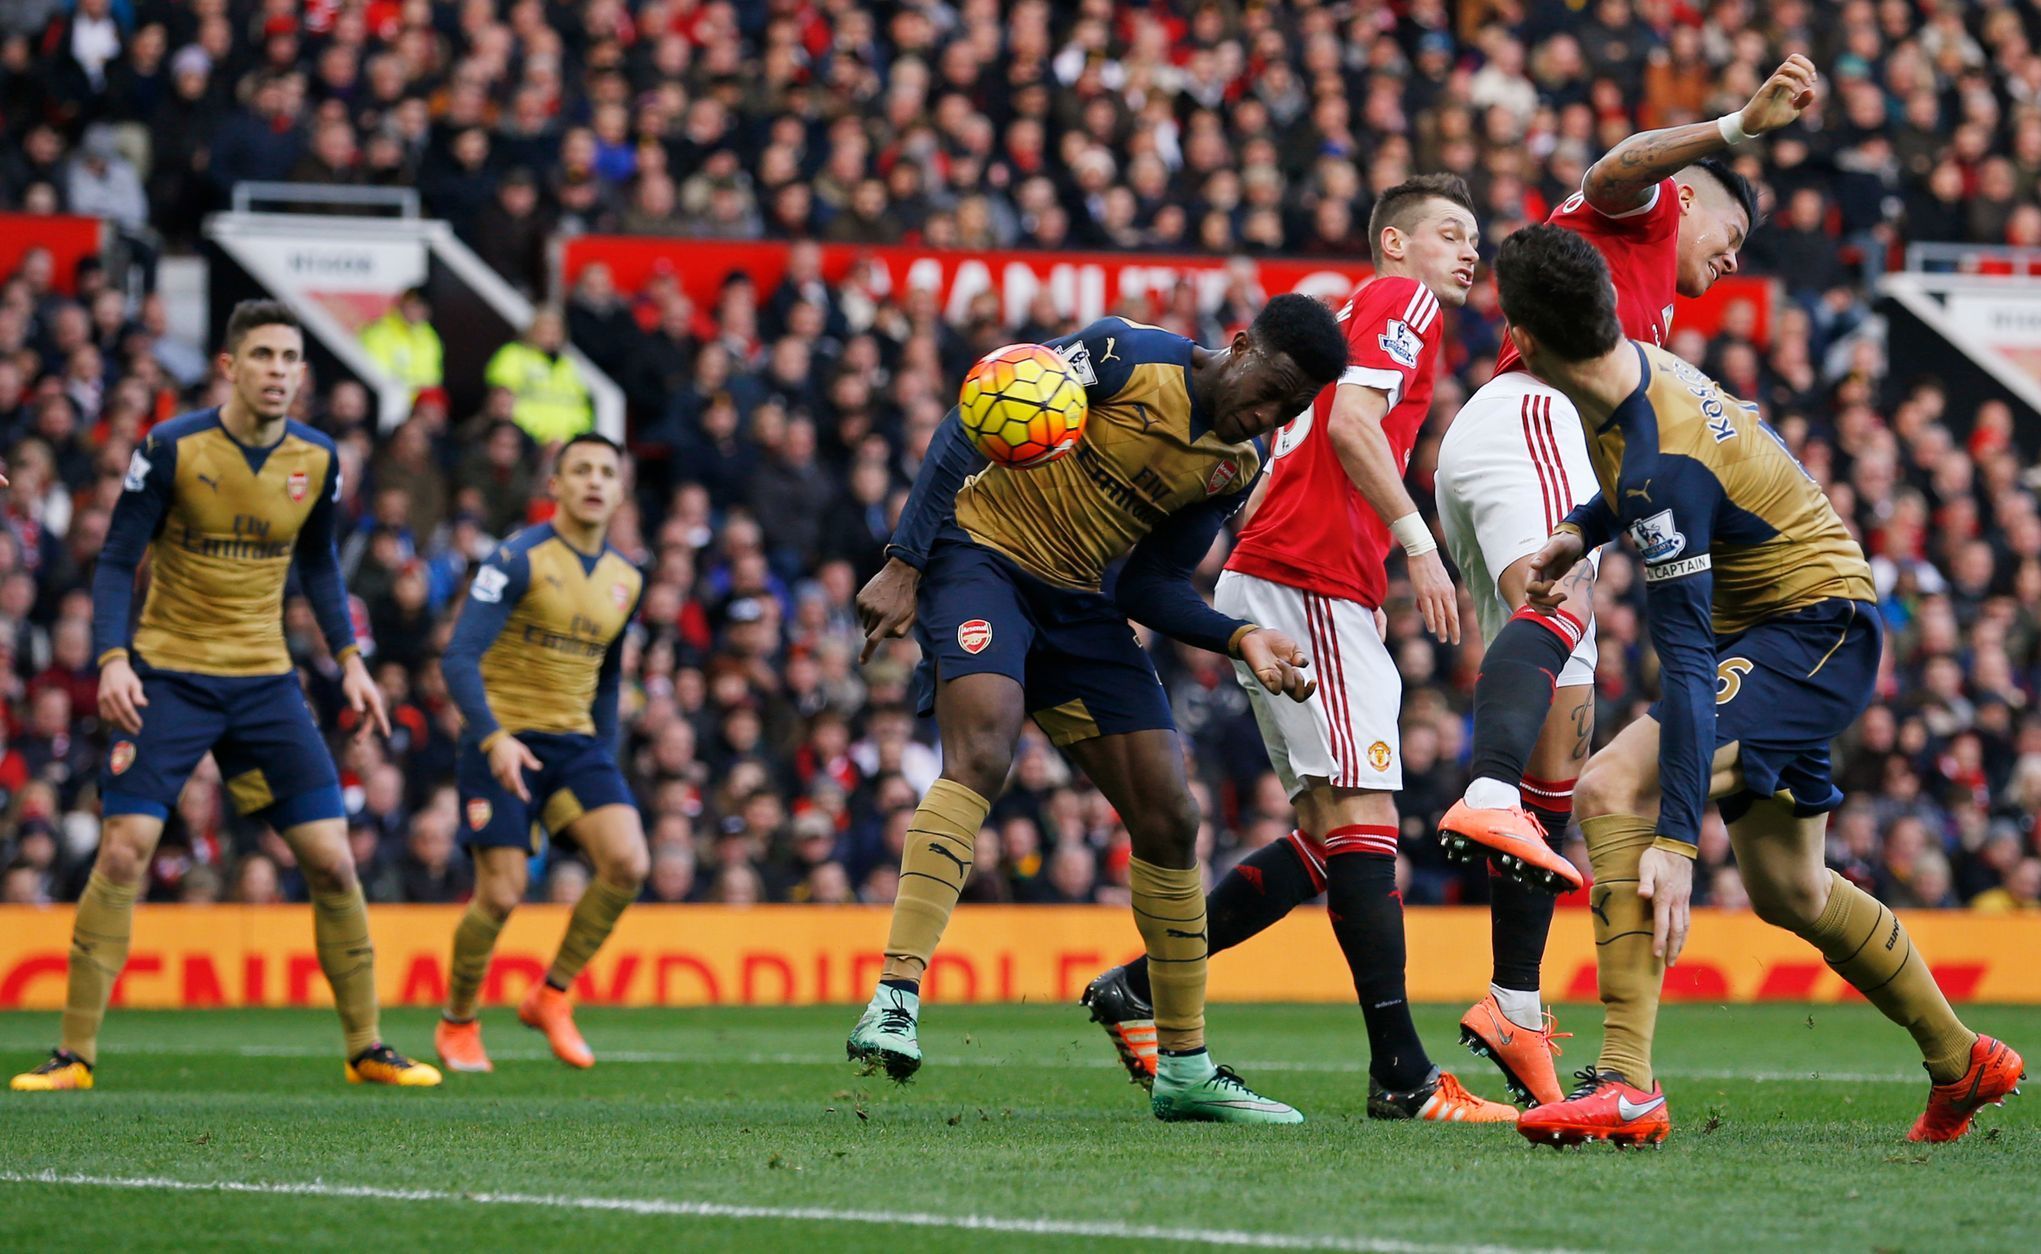 Arsenal's Danny Welbeck scores their first goal